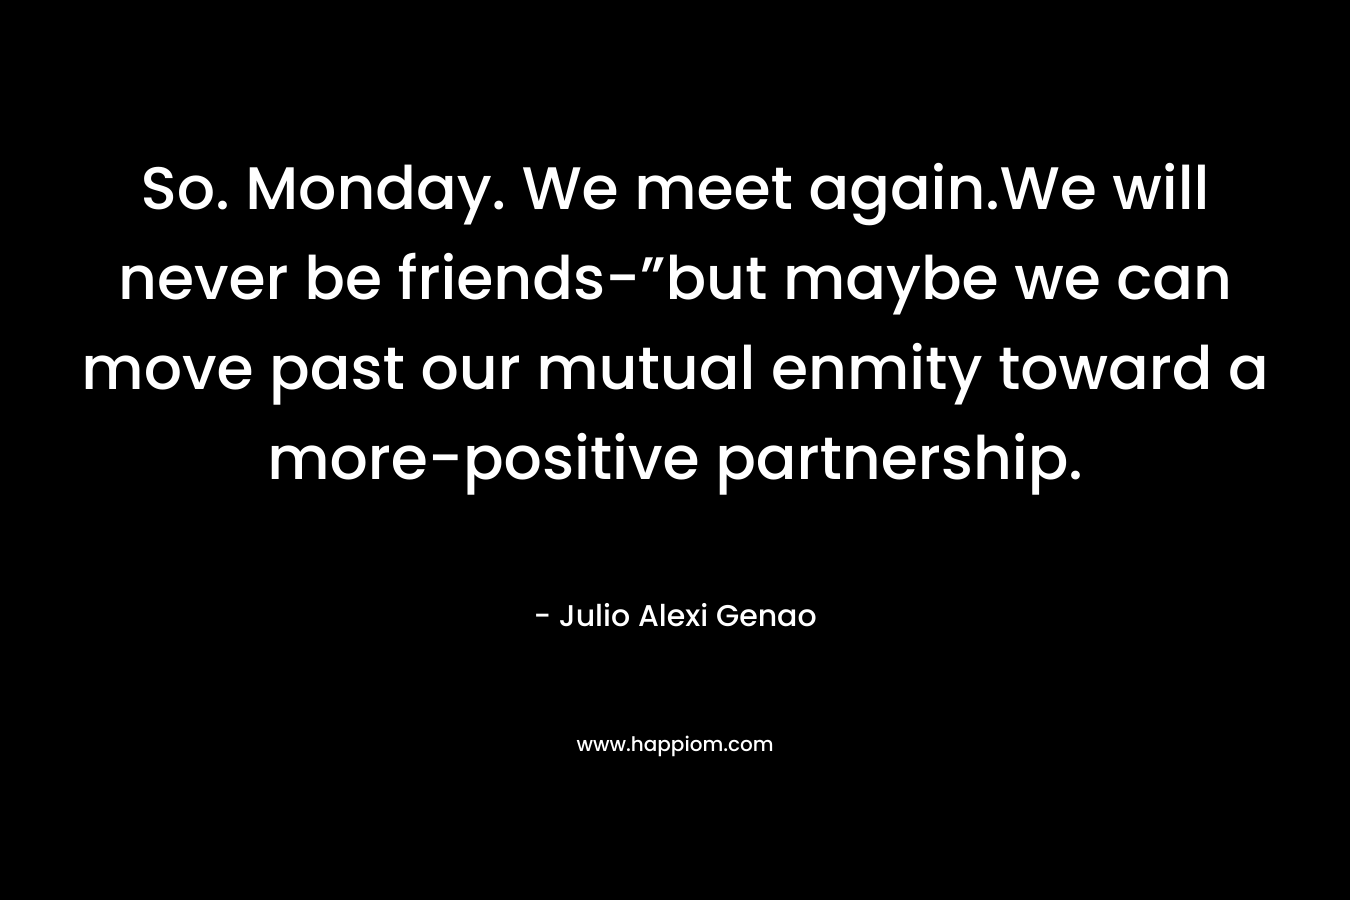 So. Monday. We meet again.We will never be friends-”but maybe we can move past our mutual enmity toward a more-positive partnership.